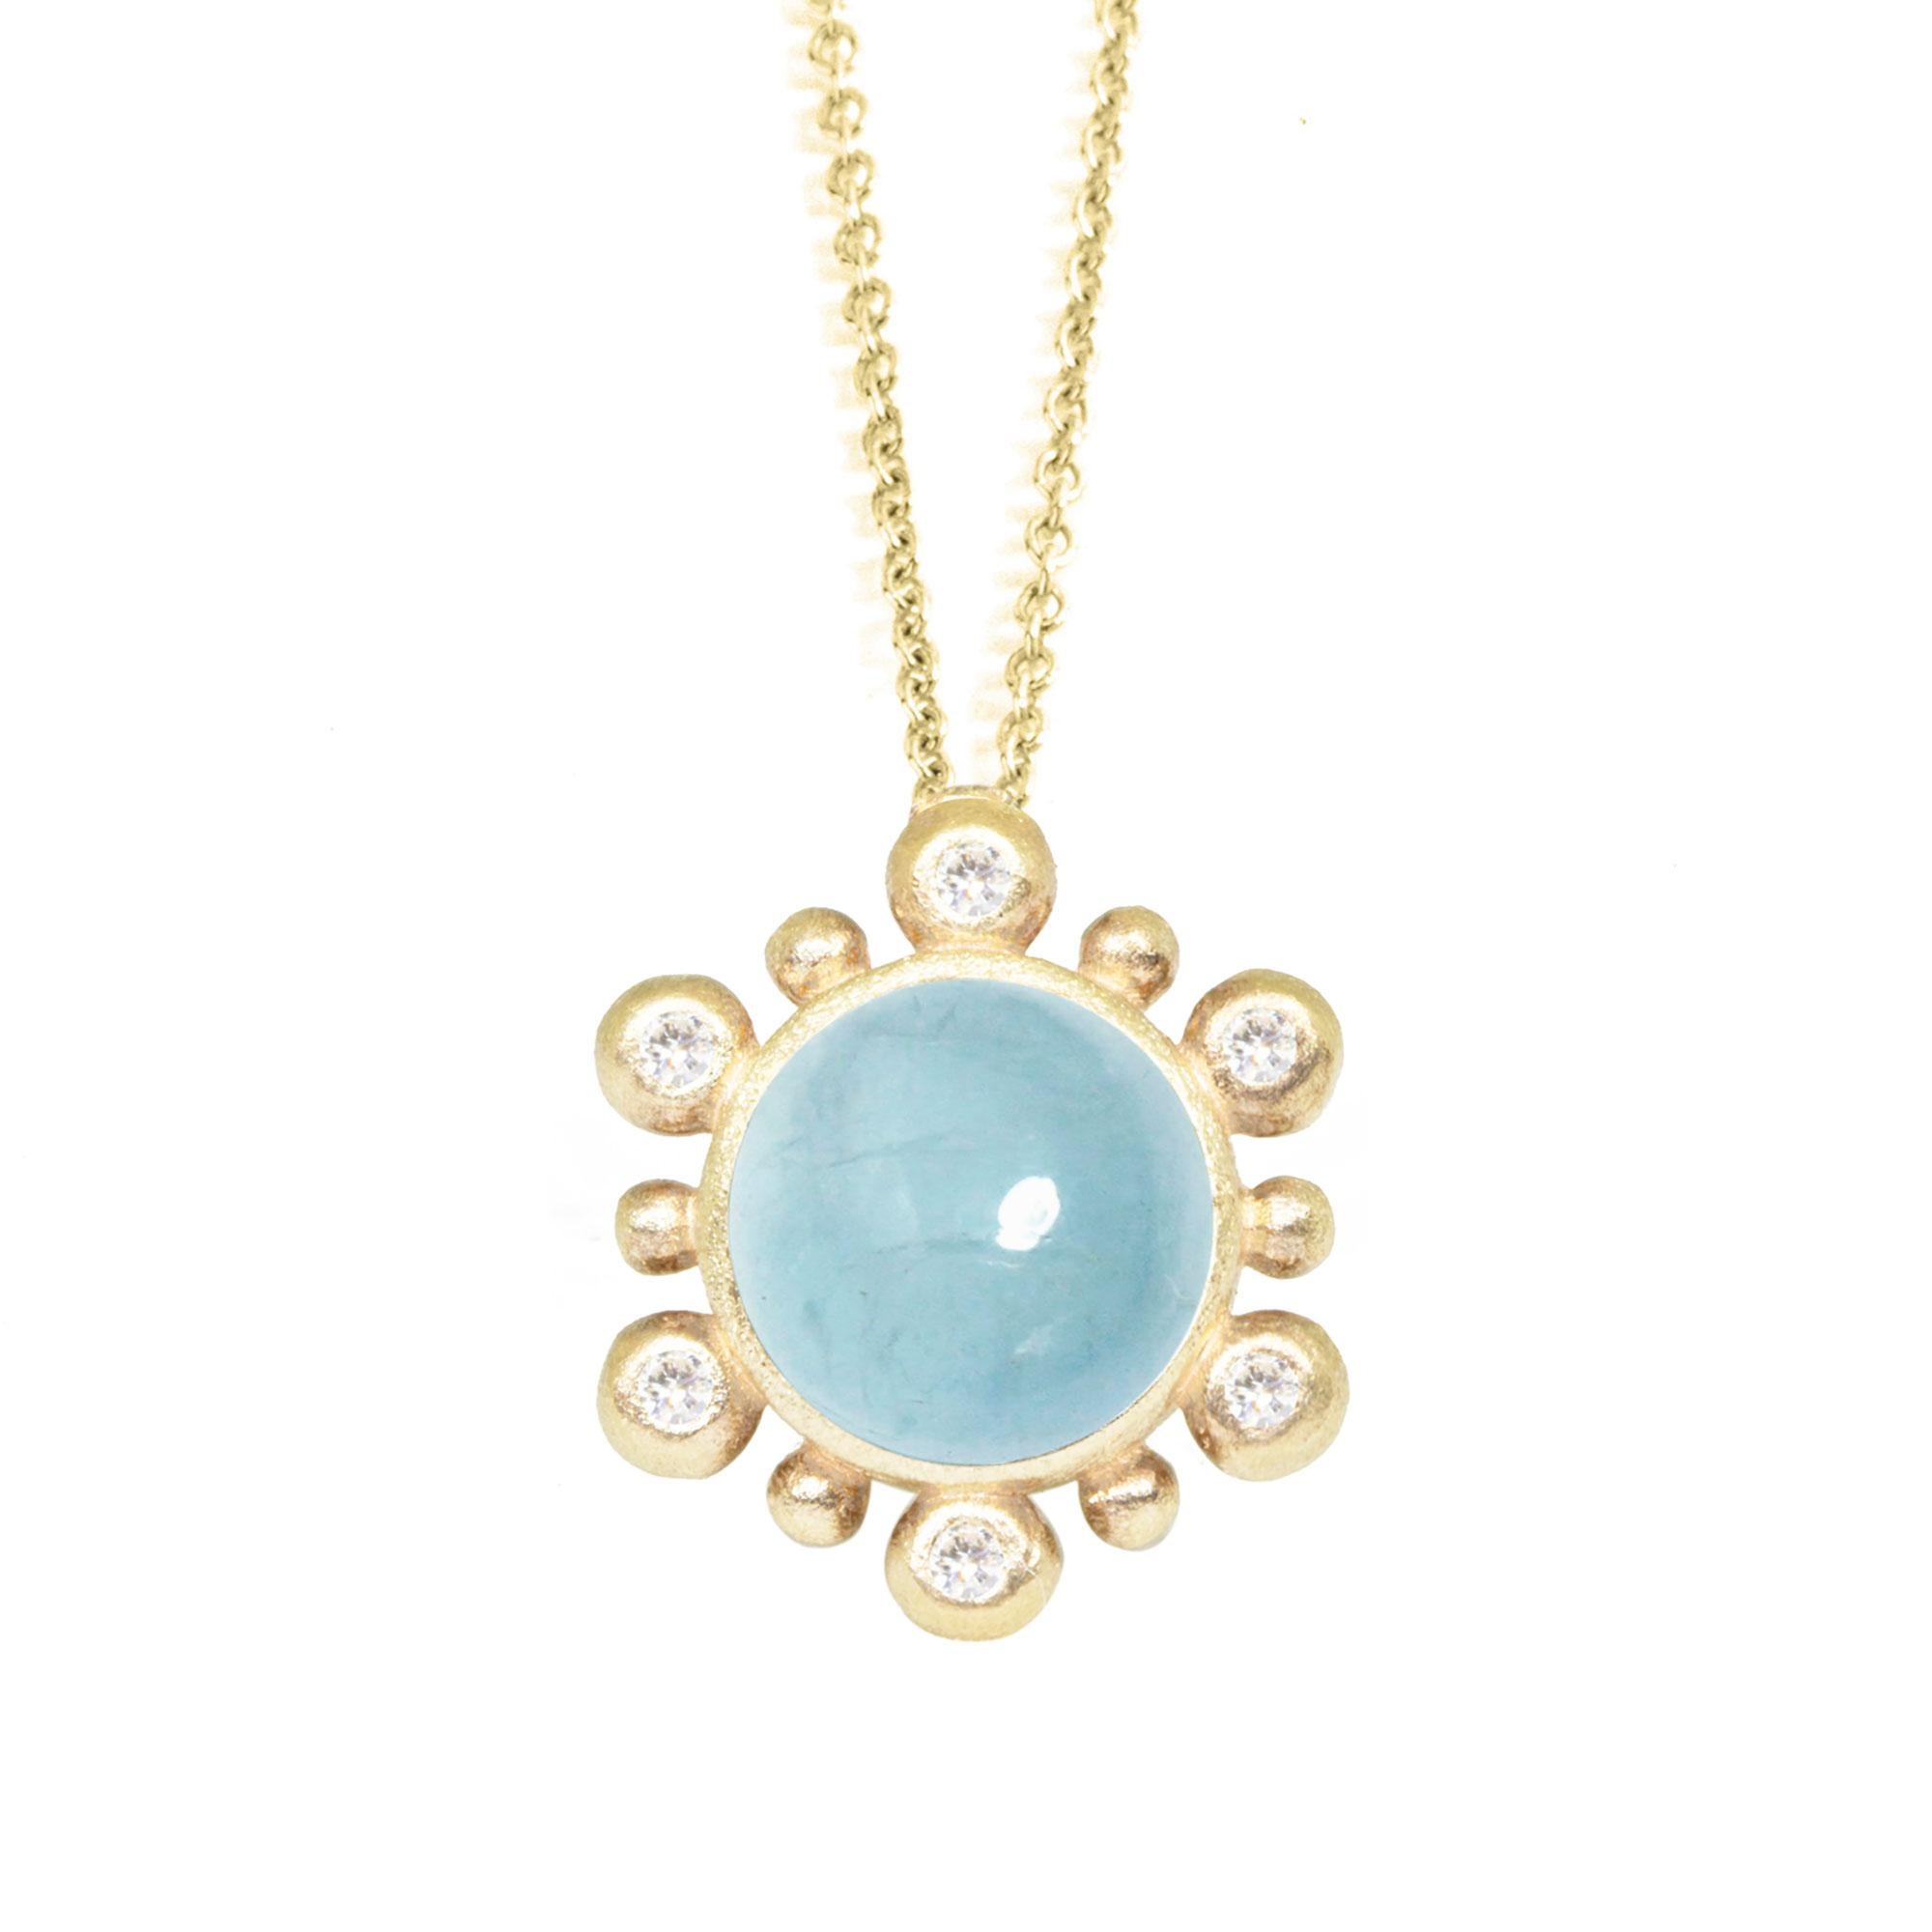 Details
Metal: 18K Yellow Gold
Stone carat: 1.25
Diamond carat: 0.06
Length:
Stone size: 7mm

About the stones:
Genuine Aquamarine: As the blue-green, highly prized variety of the mineral beryl, aquamarine takes its name from the Latin for 